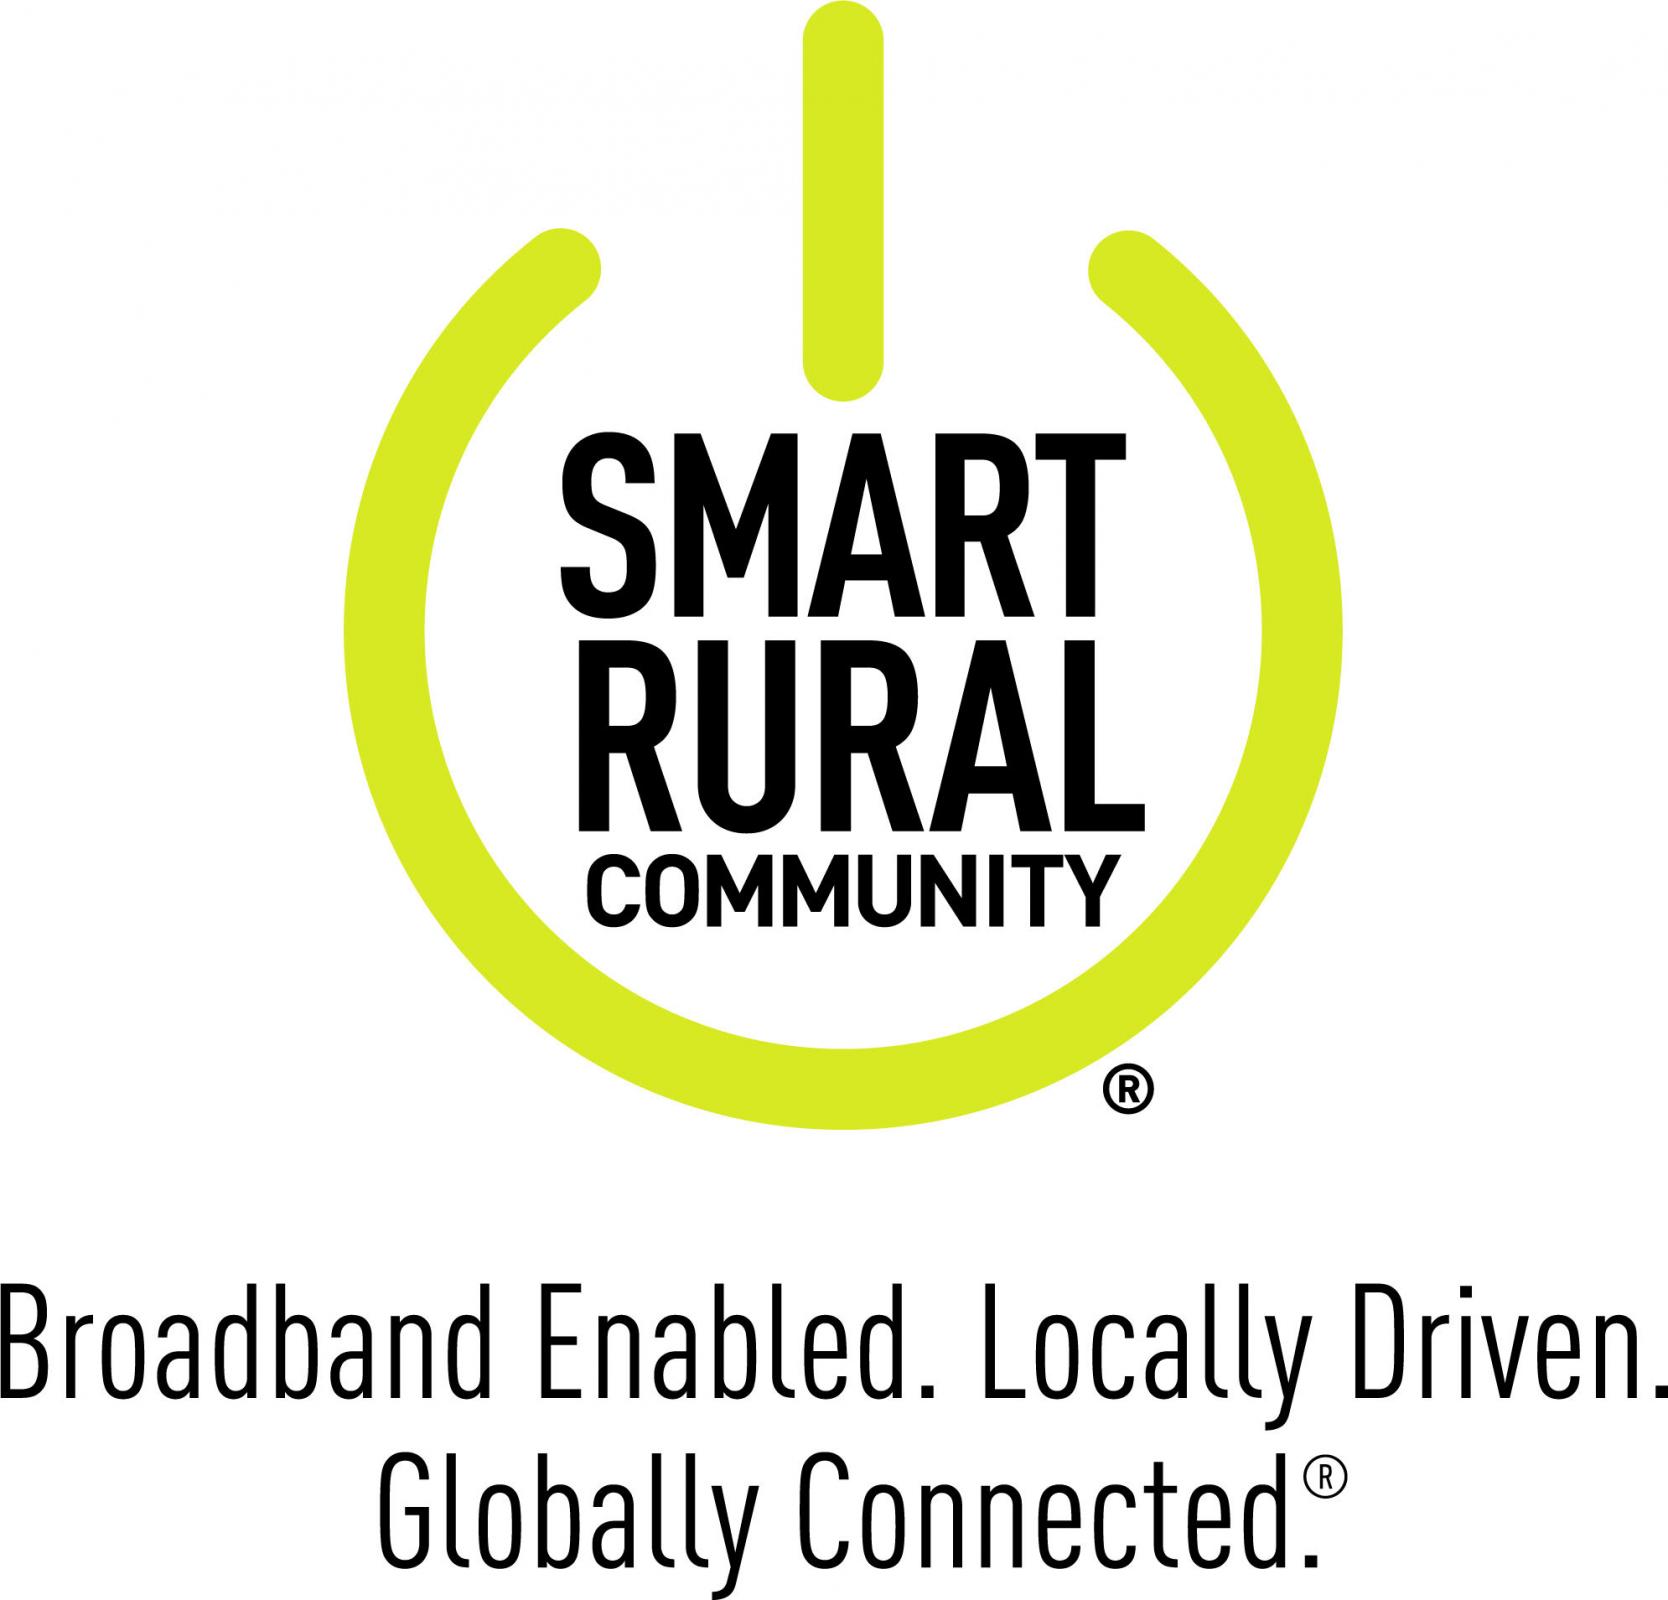 Diller Telephone Celebrates Being Named a “Smart Rural Community” Provider Main Photo